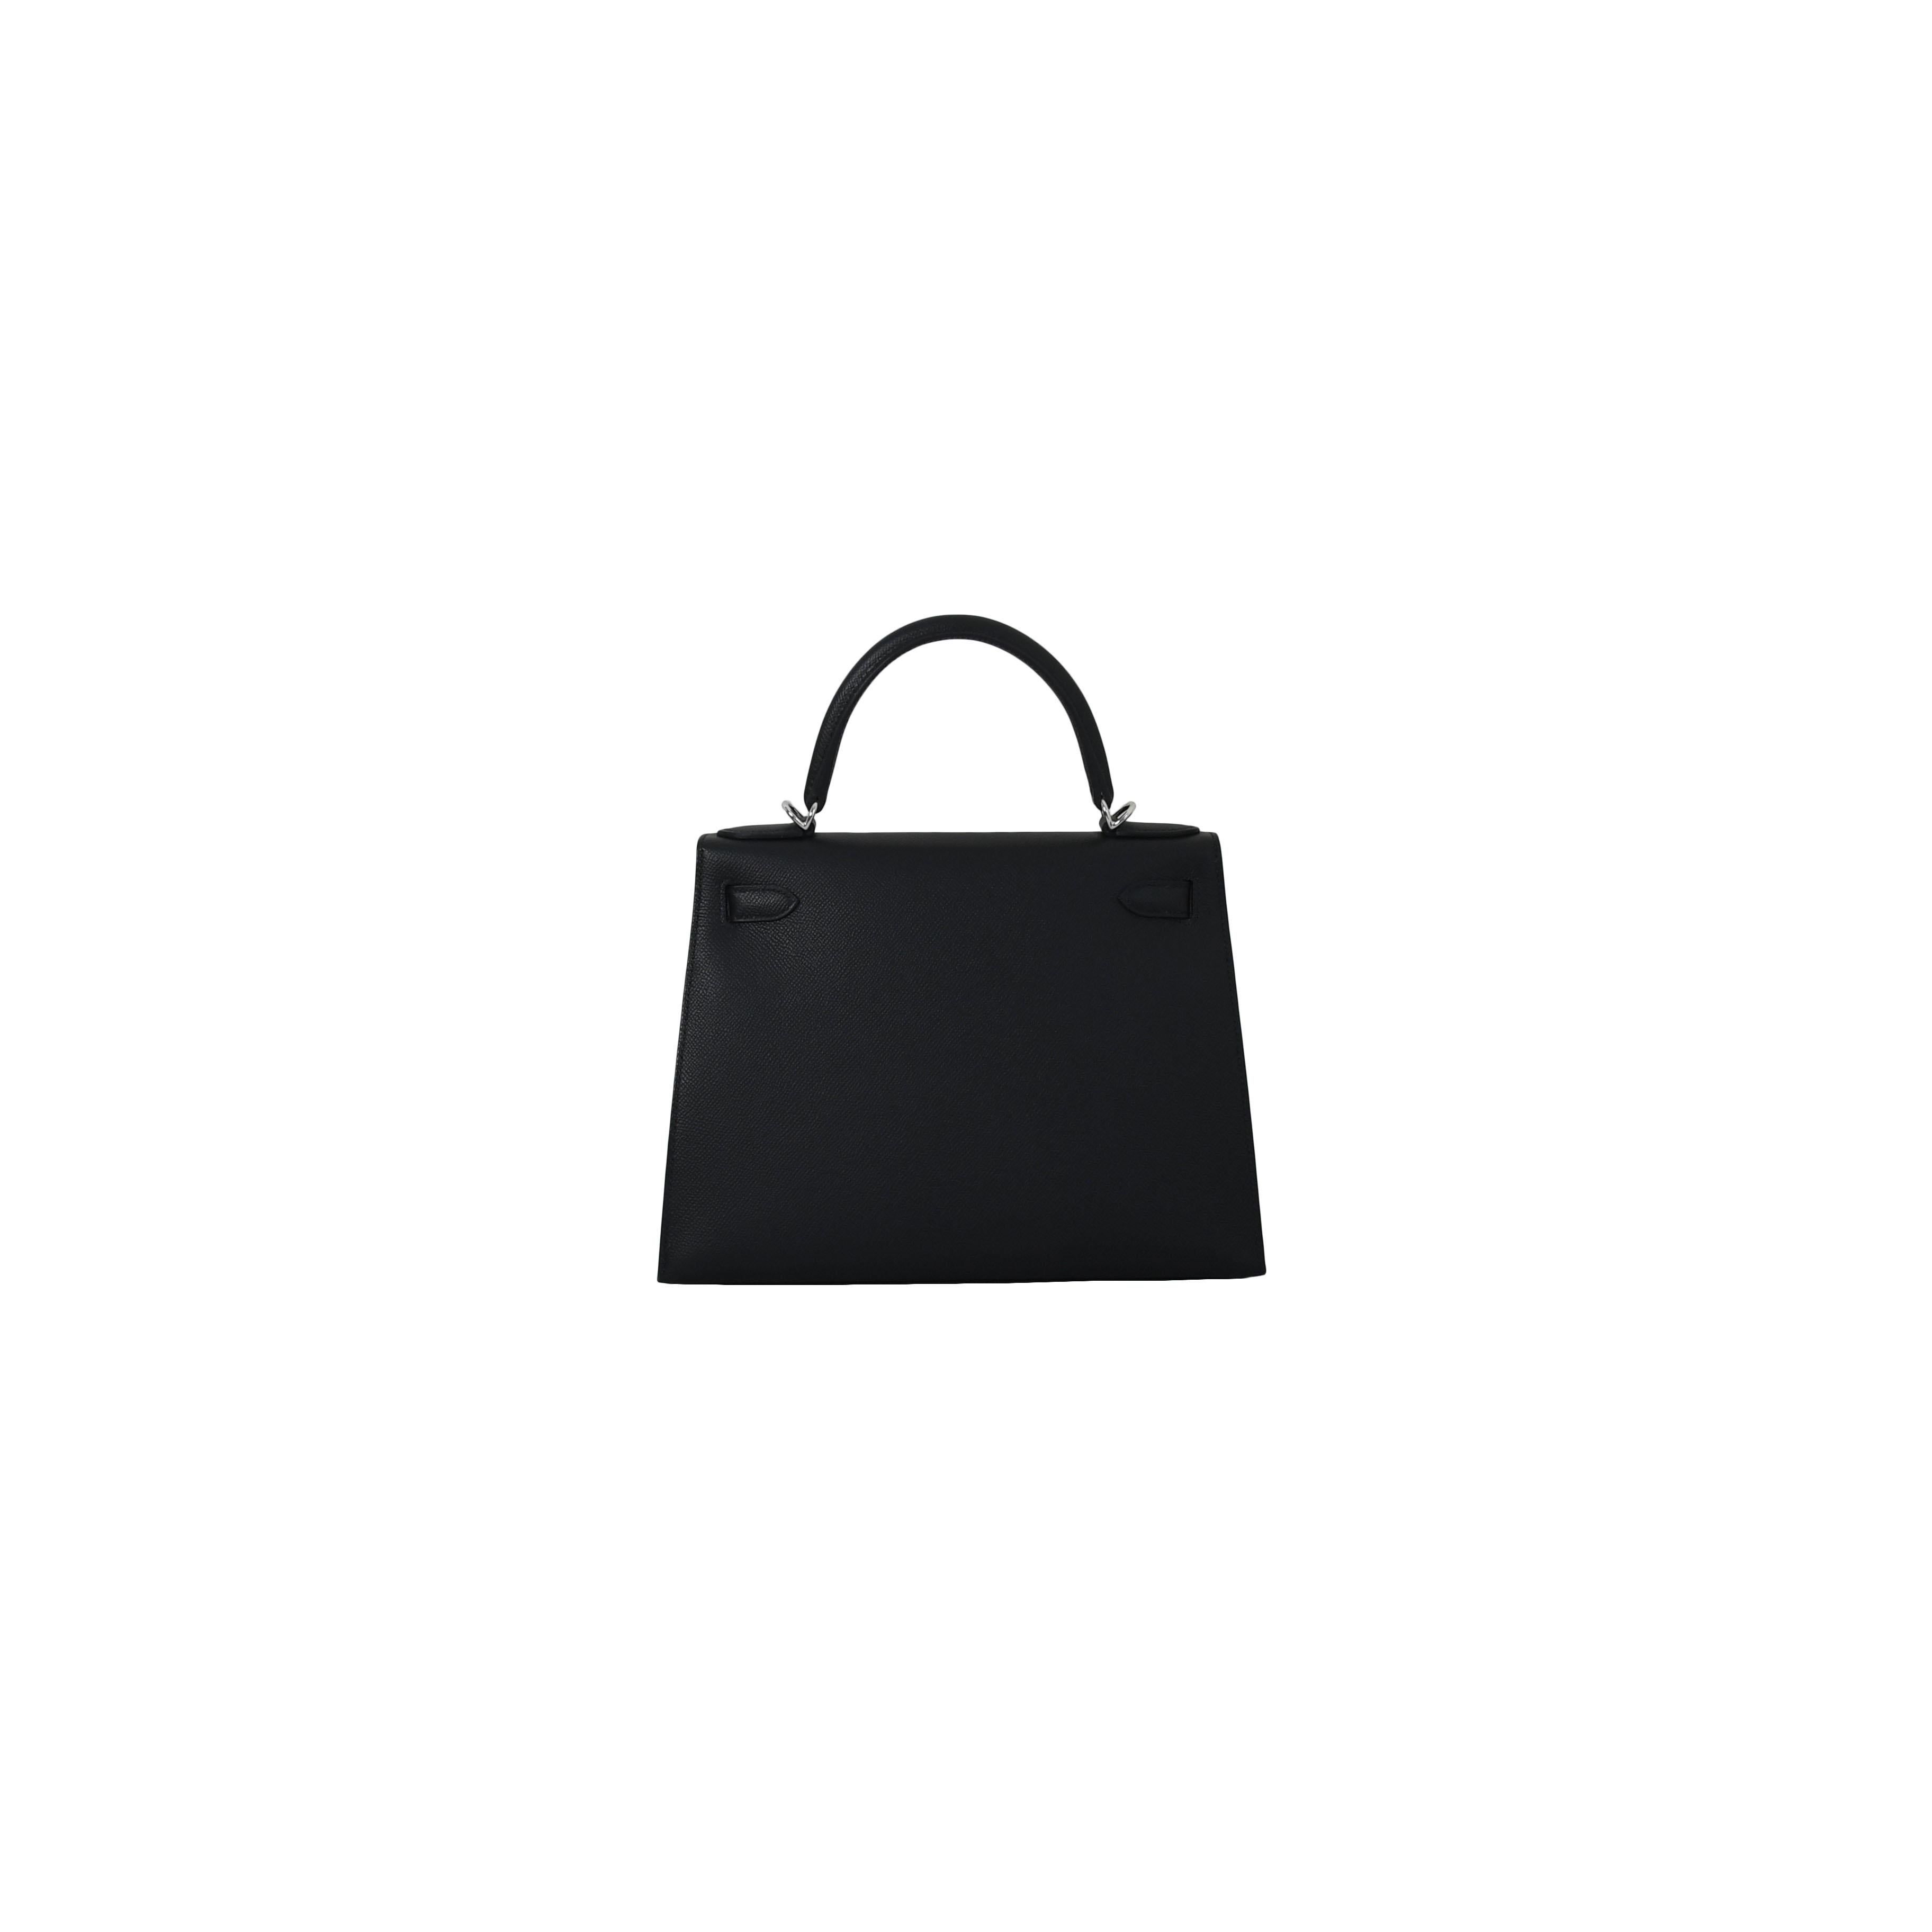 Hermes Kelly 28 Epsom Palladium Hardware Black In New Condition For Sale In Flushing, NY